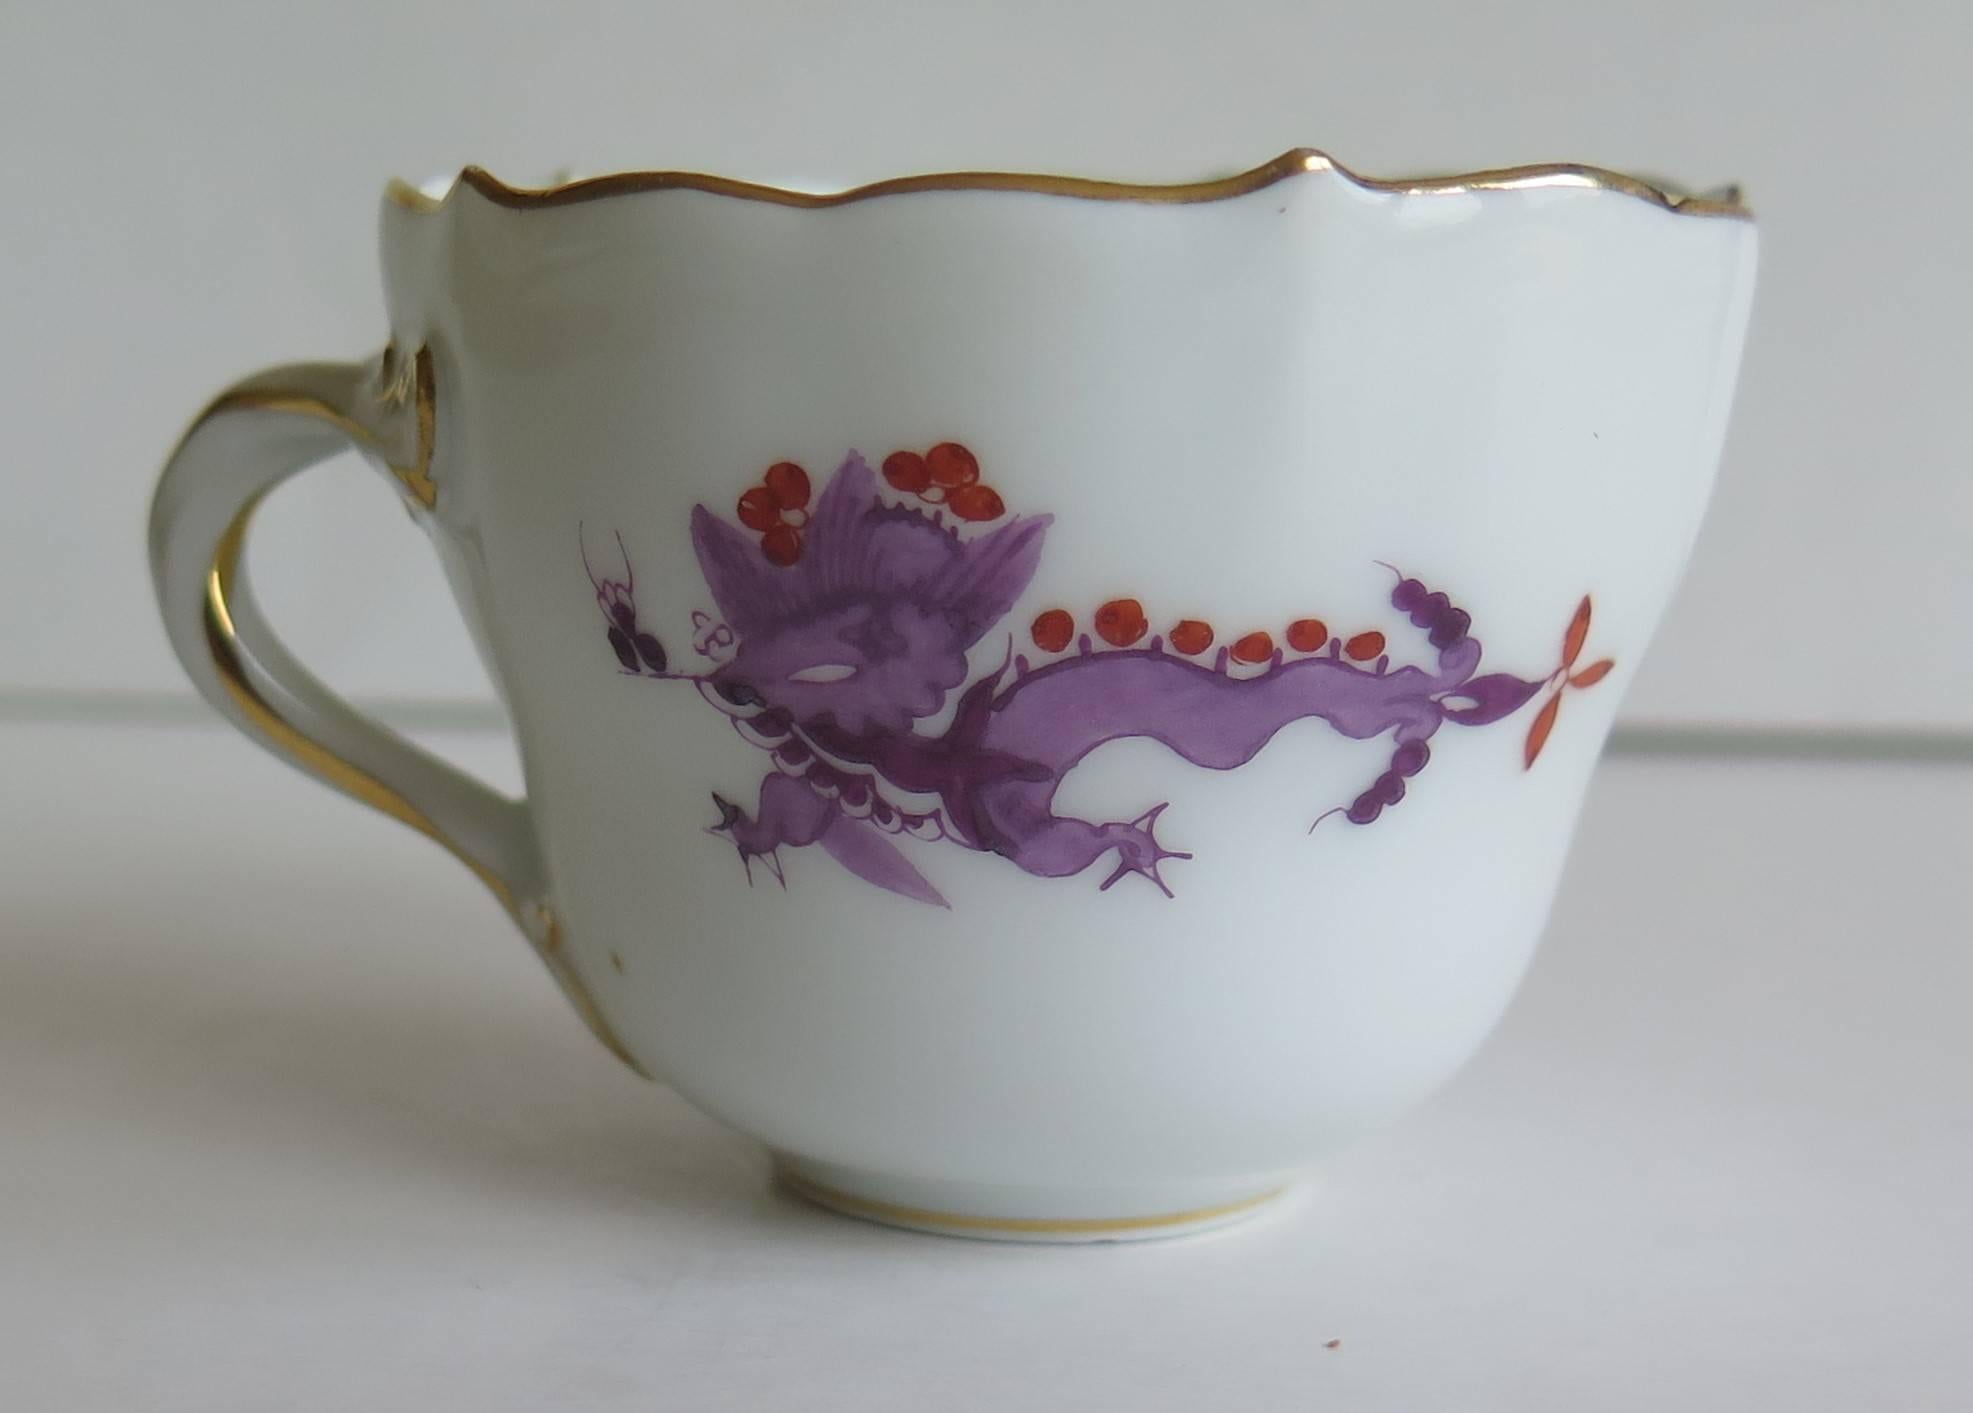 Chinoiserie Meissen Porcelain Demitasse Cup and Saucer Chinese Dragon Pattern, circa 1928